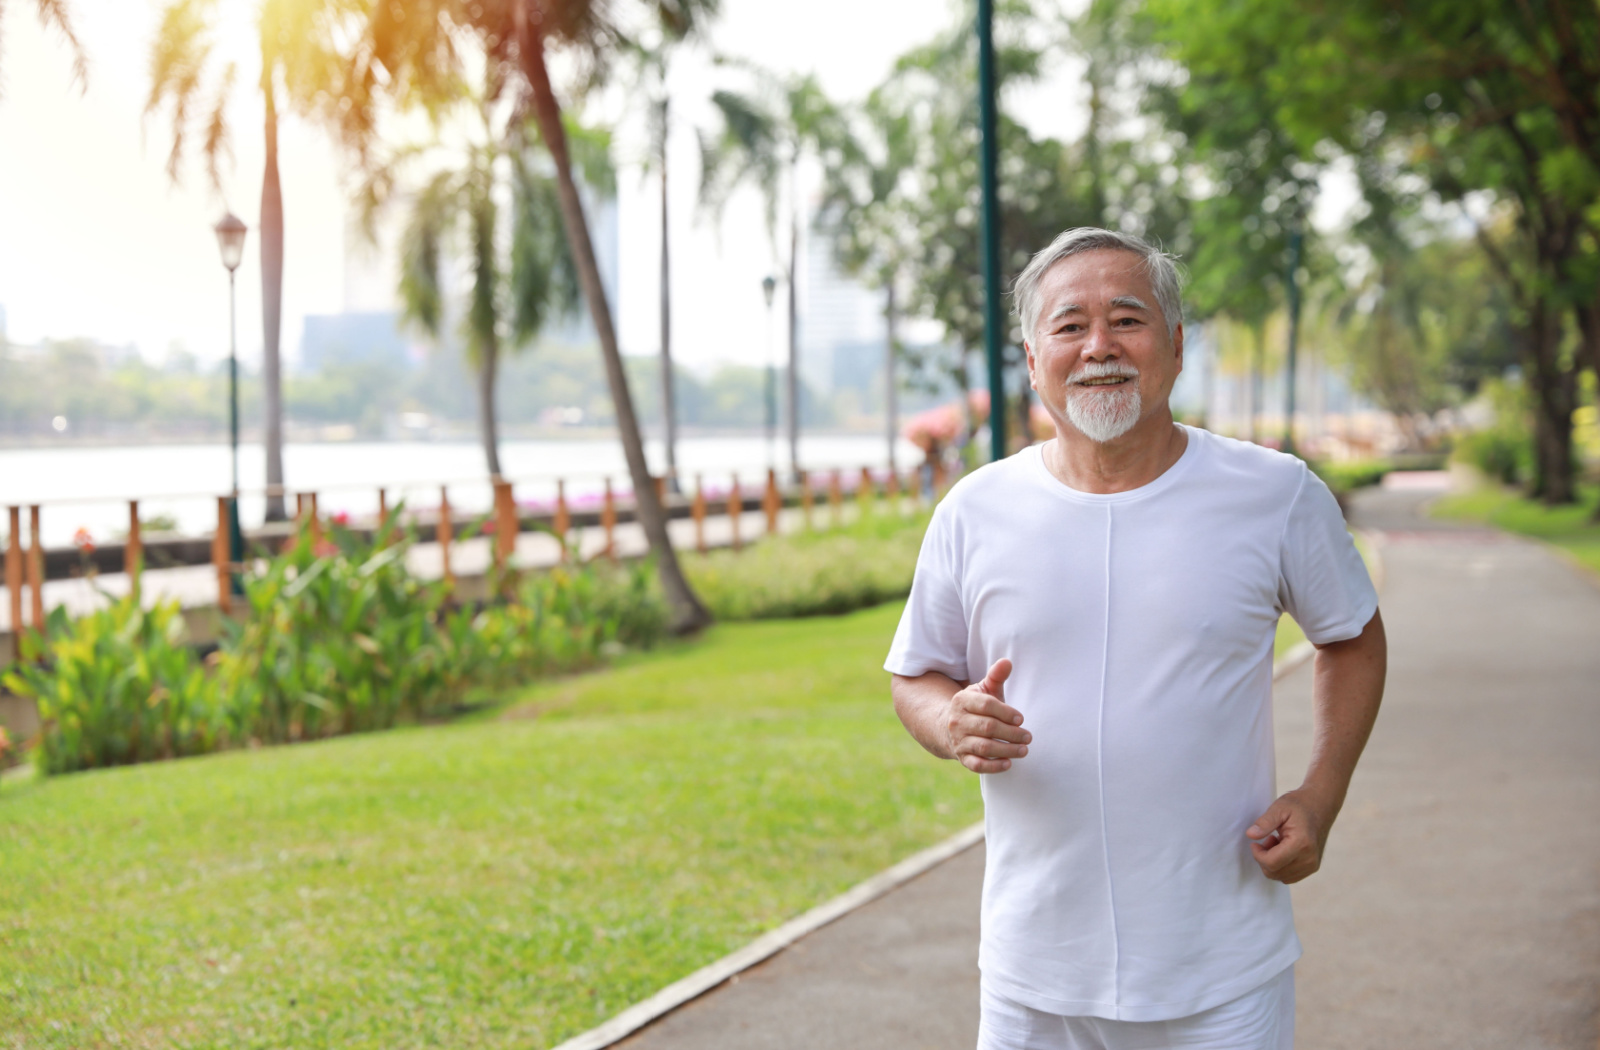 A senior man smiling looking directly at the camera while walking in a park